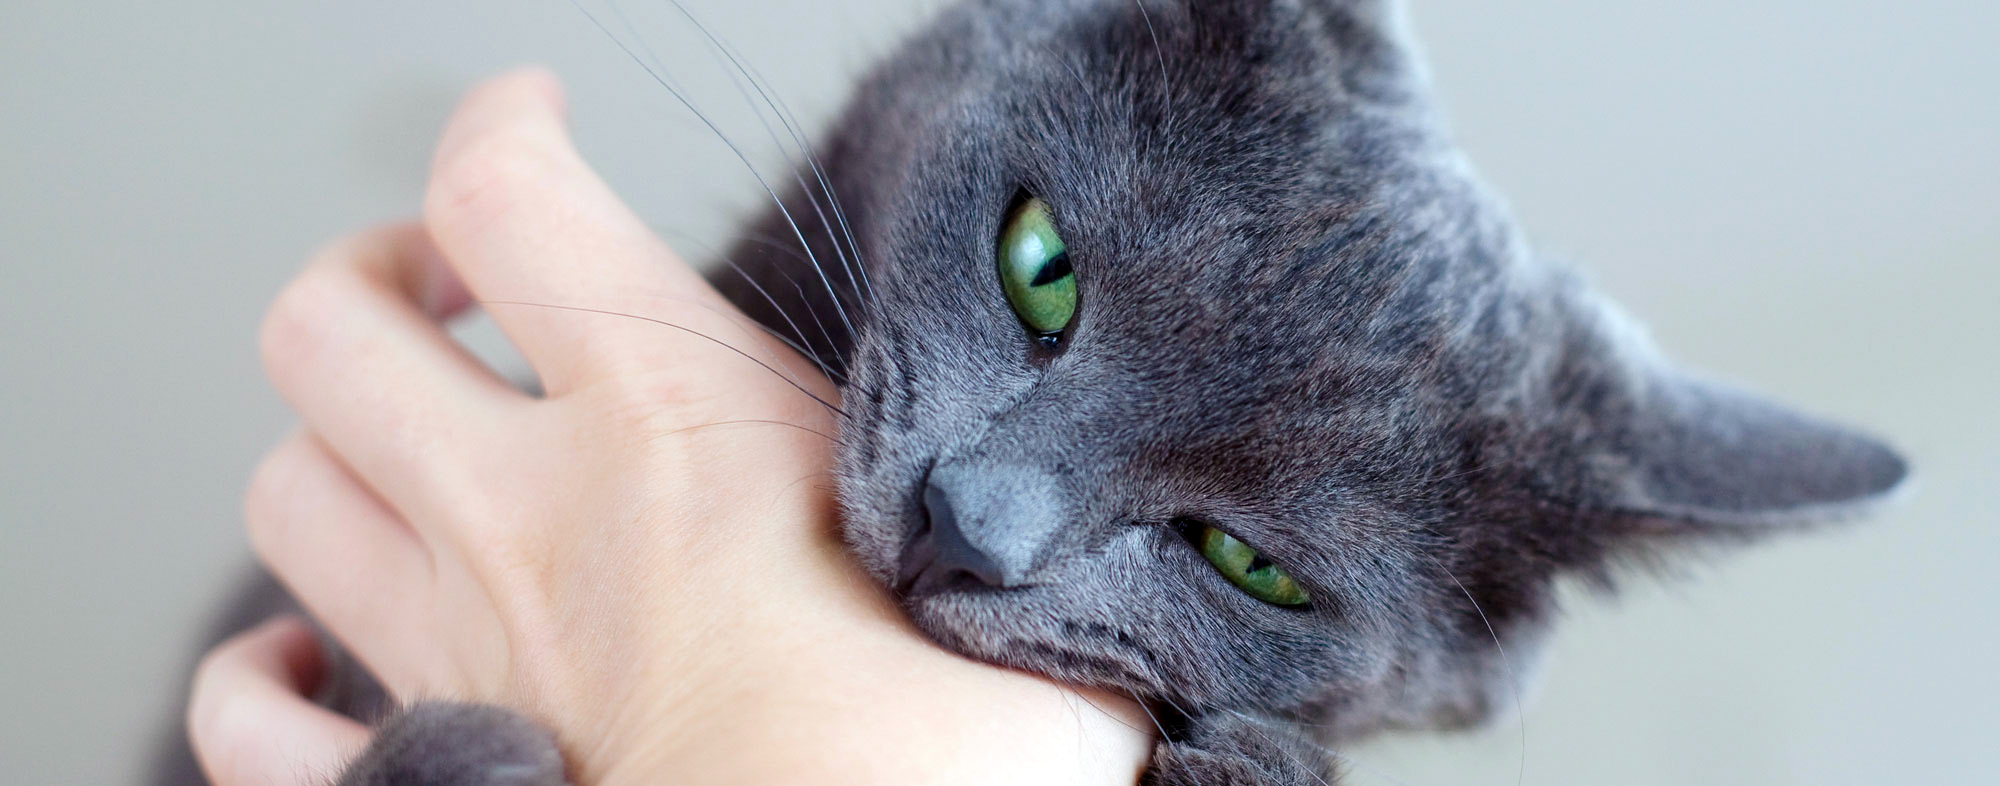 How to Properly Pet a Cat, According to Experts